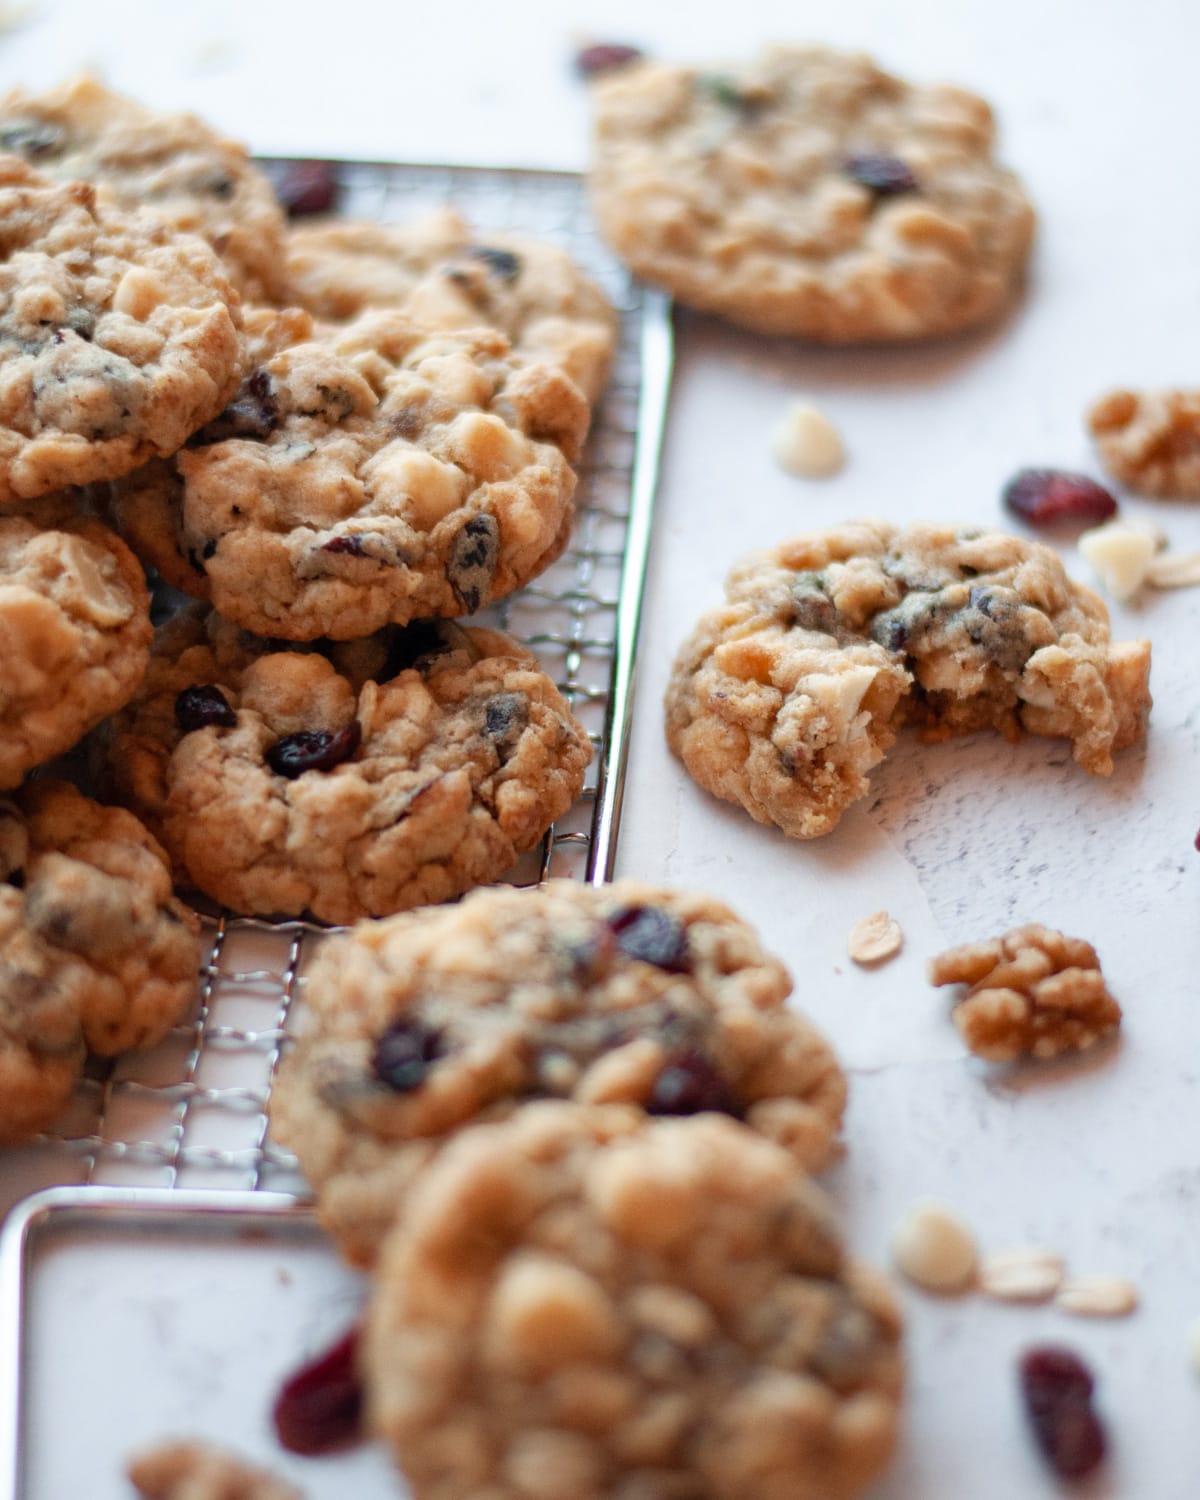 stack of white chocolate cranberry oatmeal cookies on a metal grater. the featured cookie has a bite taken out of it, and walnuts, oatmeal, white chocolate chips, and craisins scattered around.